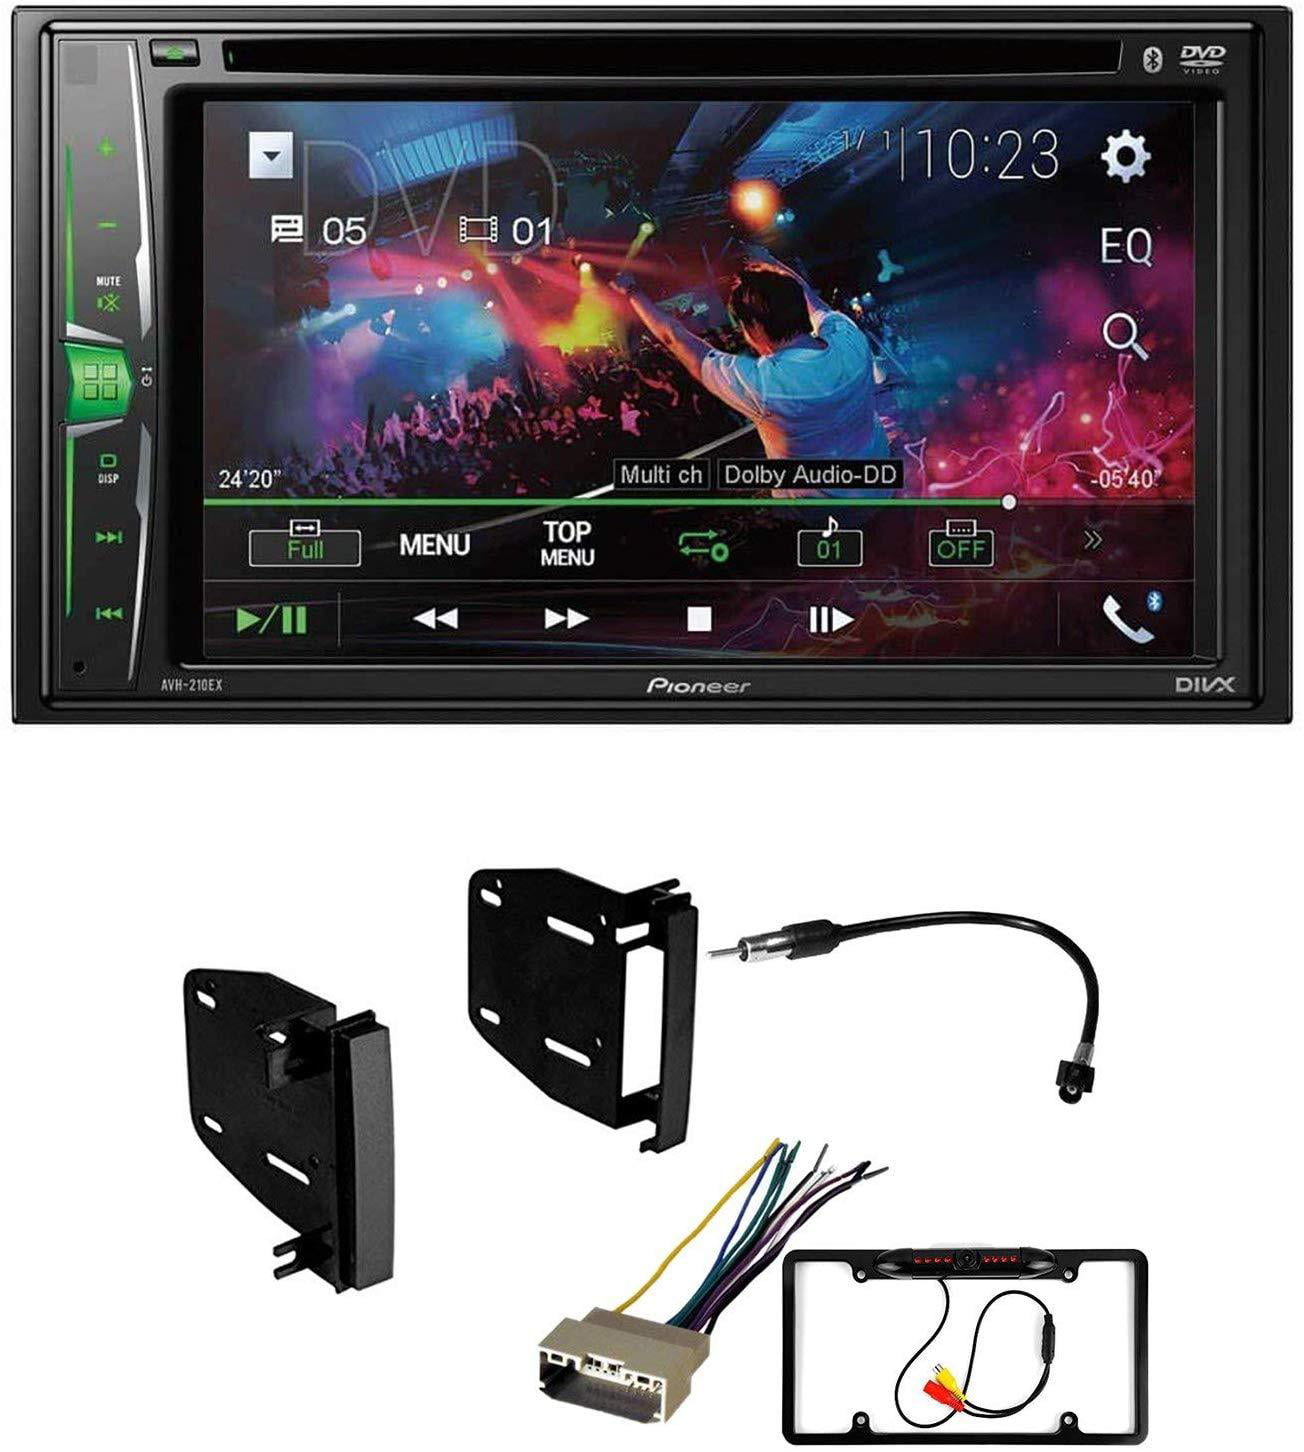 KIT4695 Bundle for 2008-2014 Jeep Liberty W/ Pioneer Double DIN Car 2004 Jeep Liberty Backup Camera Install